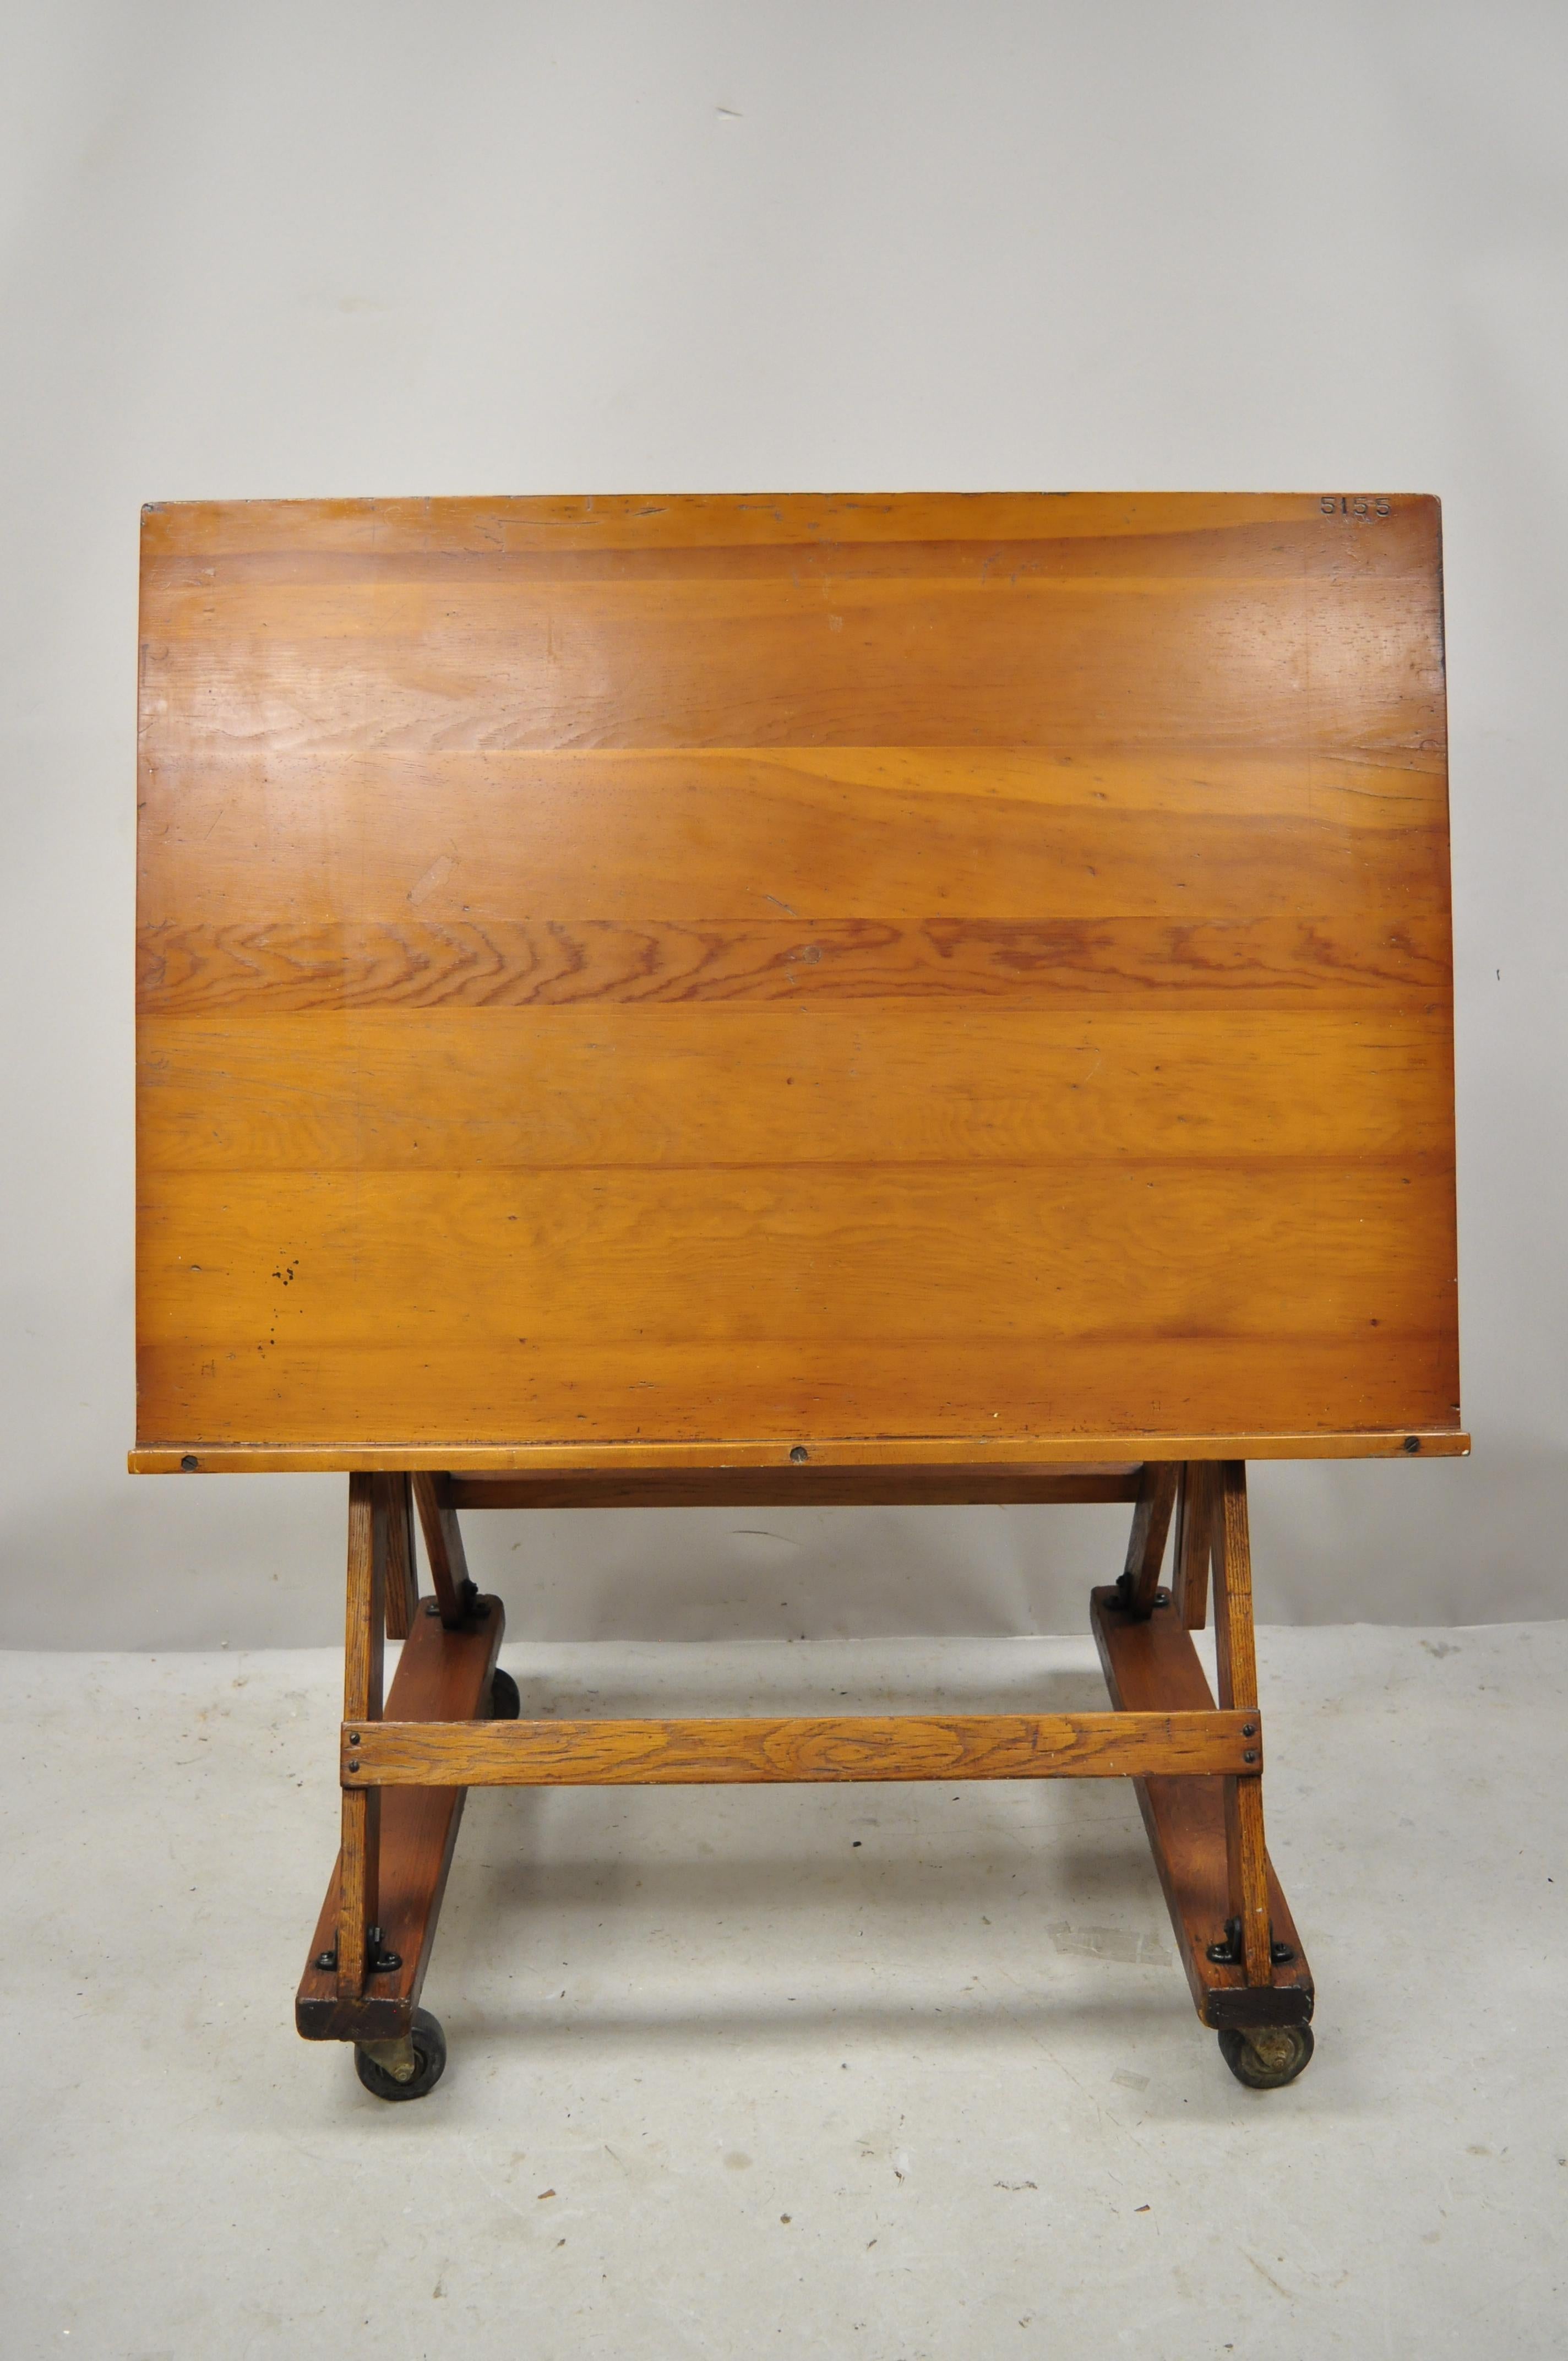 Antique Arts & Crafts oak cherry pine wood artist drafting table on wheels. Item features smooth rolling wheels, adjustable height and tilting top, solid wood construction, beautiful wood grain, very nice antique item, circa early to mid-1900s.